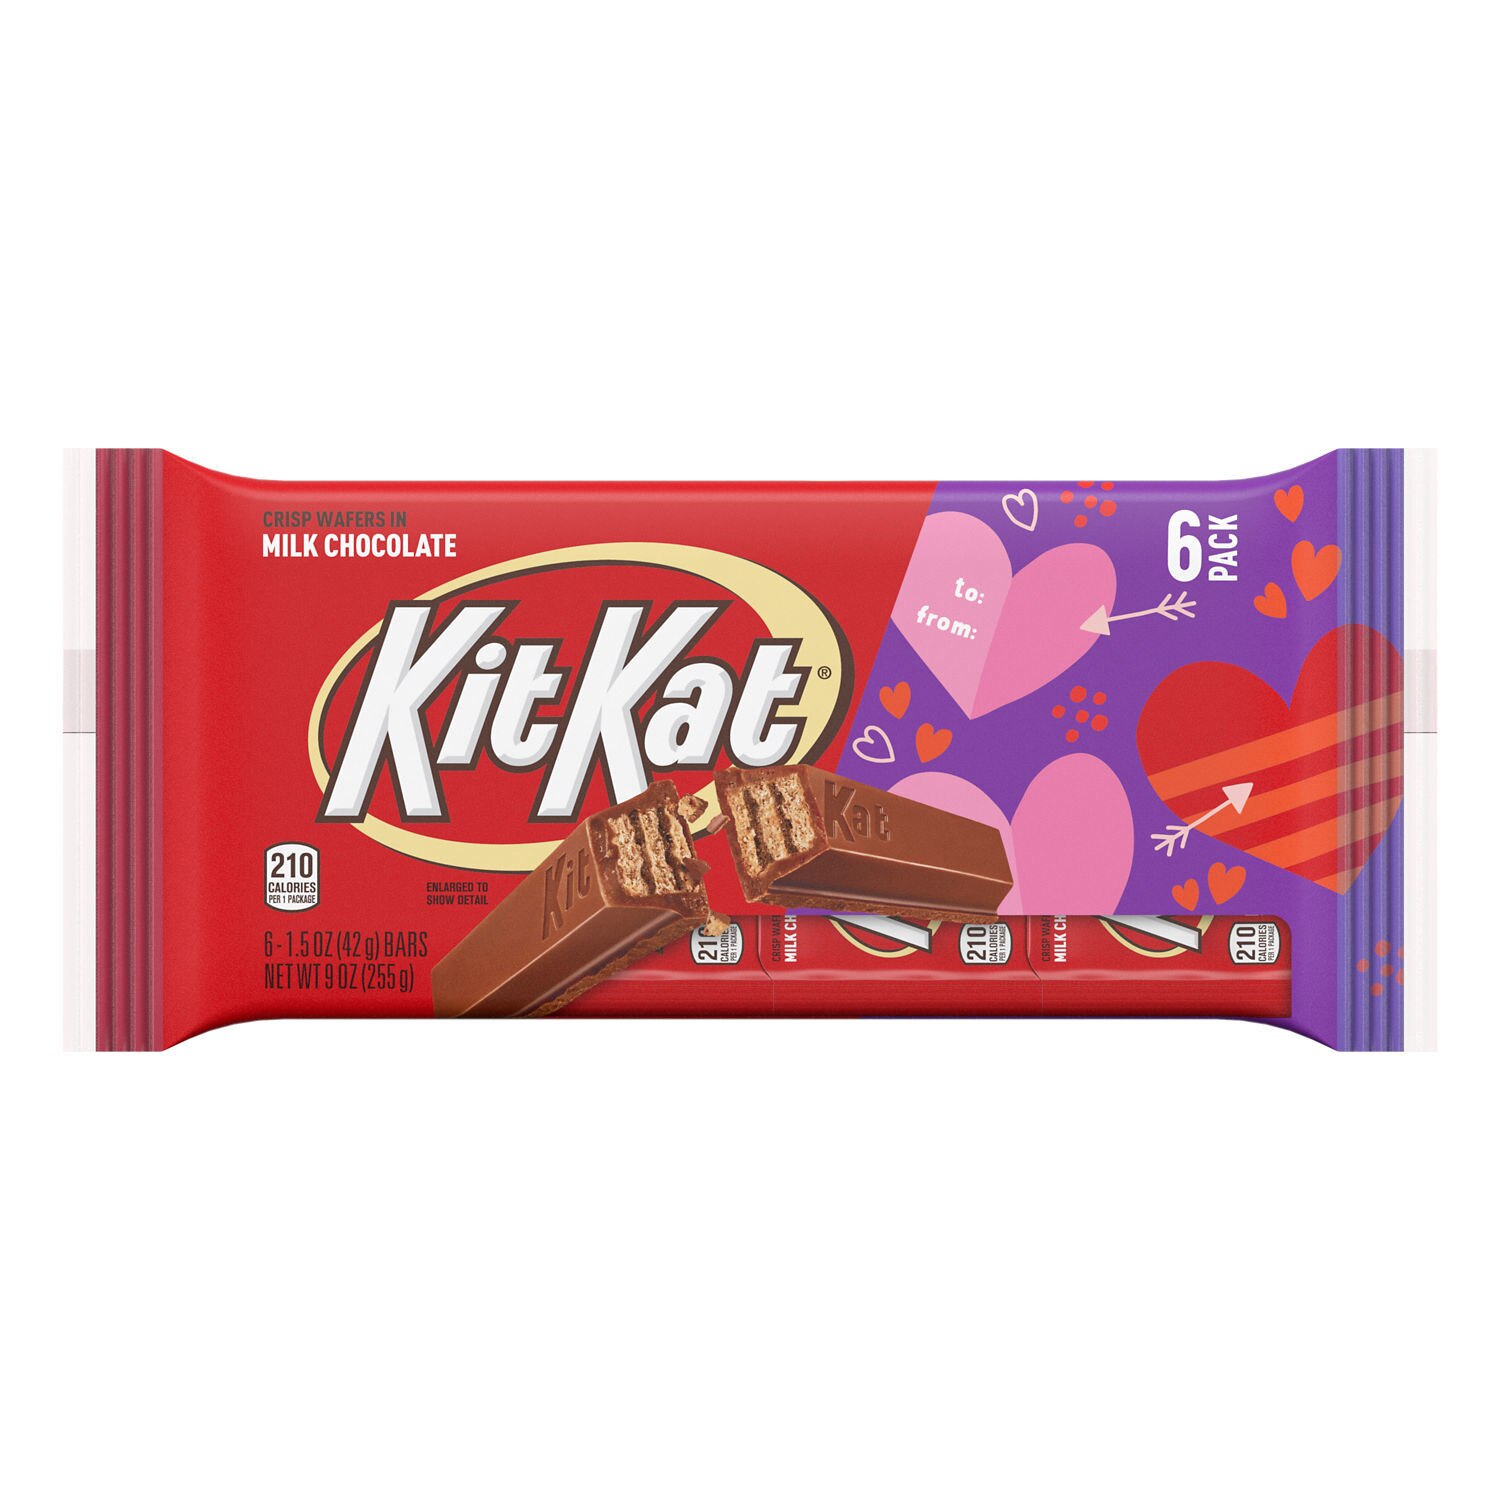 KIT KAT Milk Chocolate Wafer Candy, Valentine's Day, 1.5 oz, Bars (6 Count)